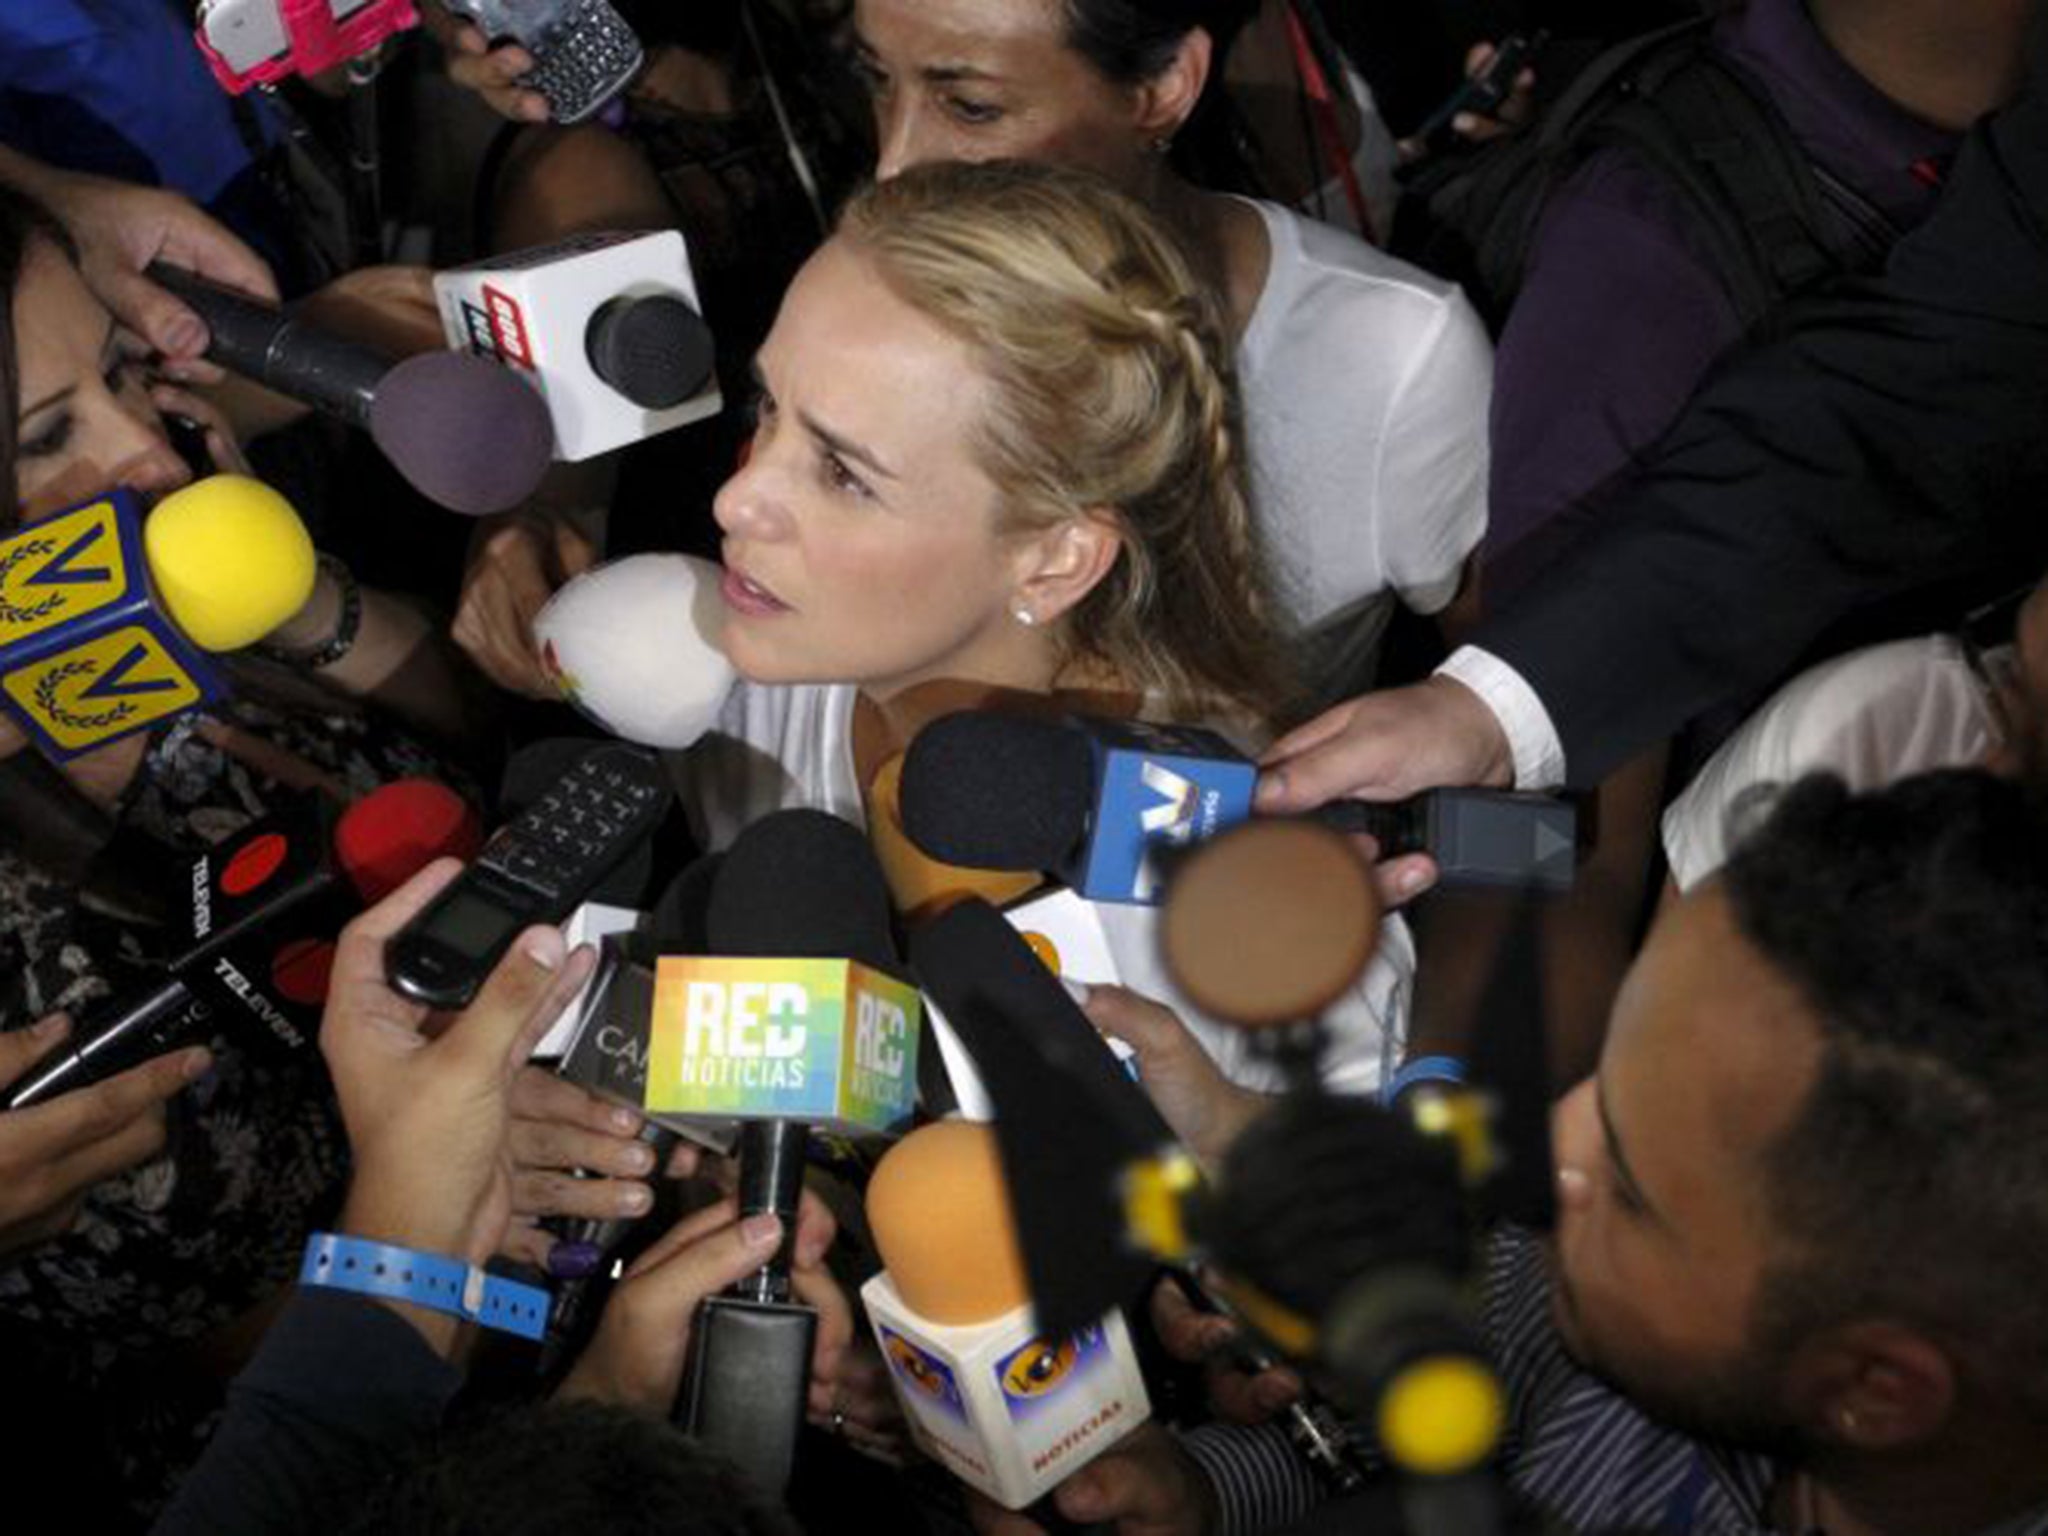 Lilian Tintori, wife of jailed opposition leader Leopoldo Lopez, following her husband's victory